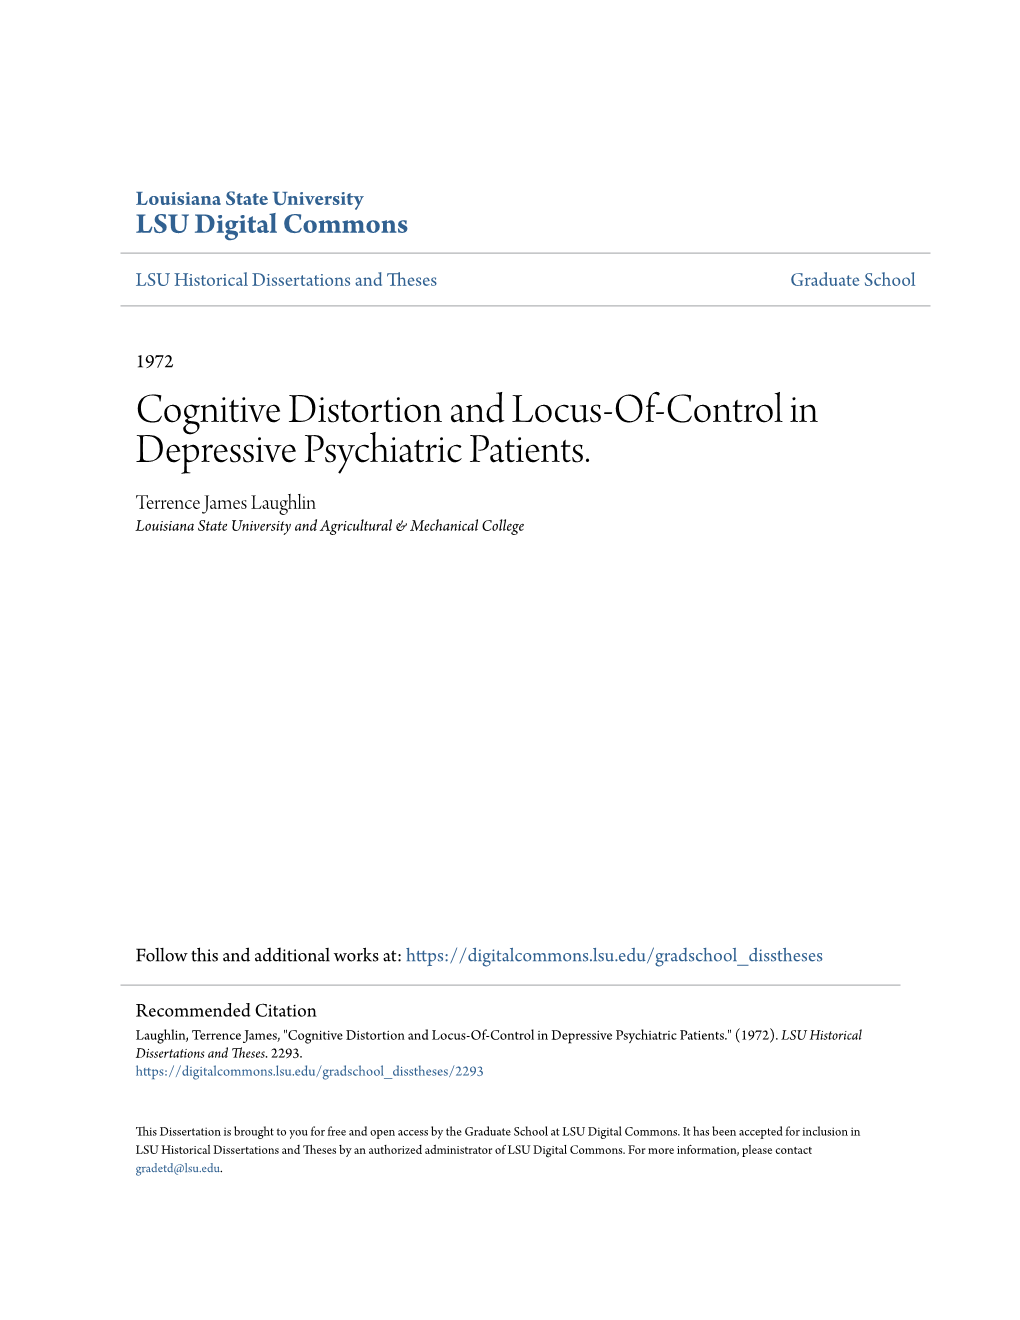 Cognitive Distortion and Locus-Of-Control in Depressive Psychiatric Patients